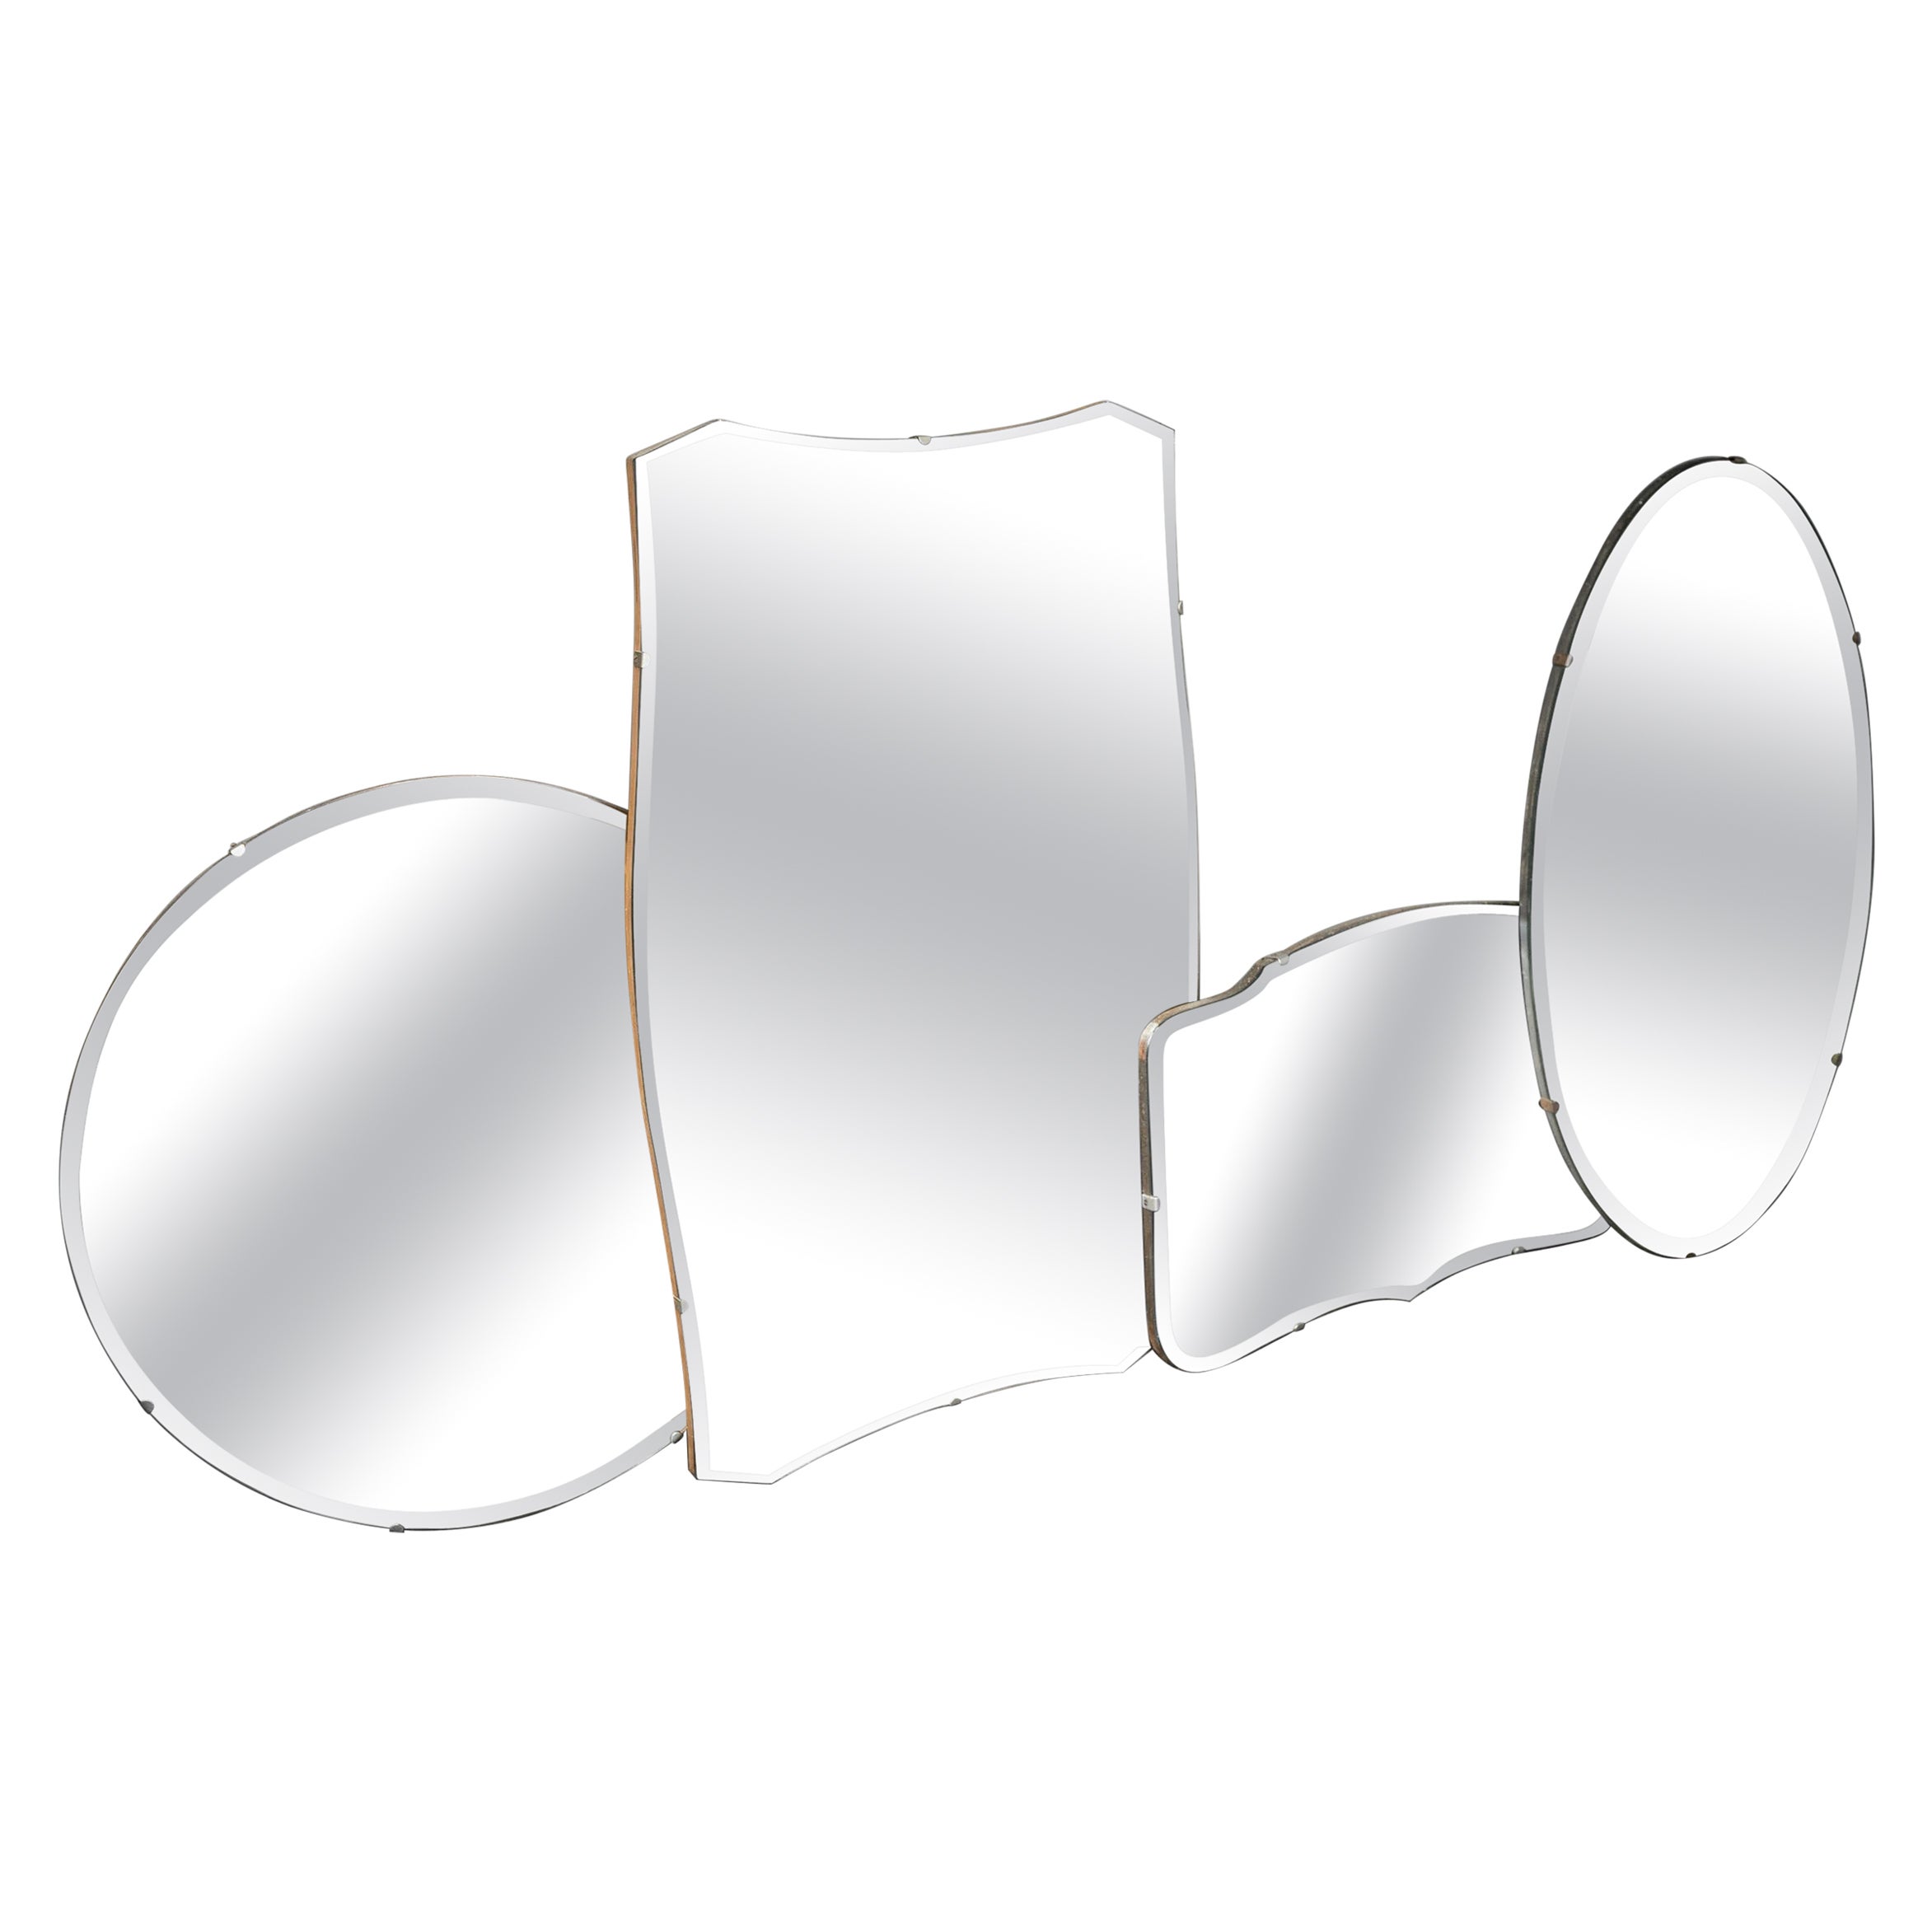 Selection of Bevel Edged Mirrors